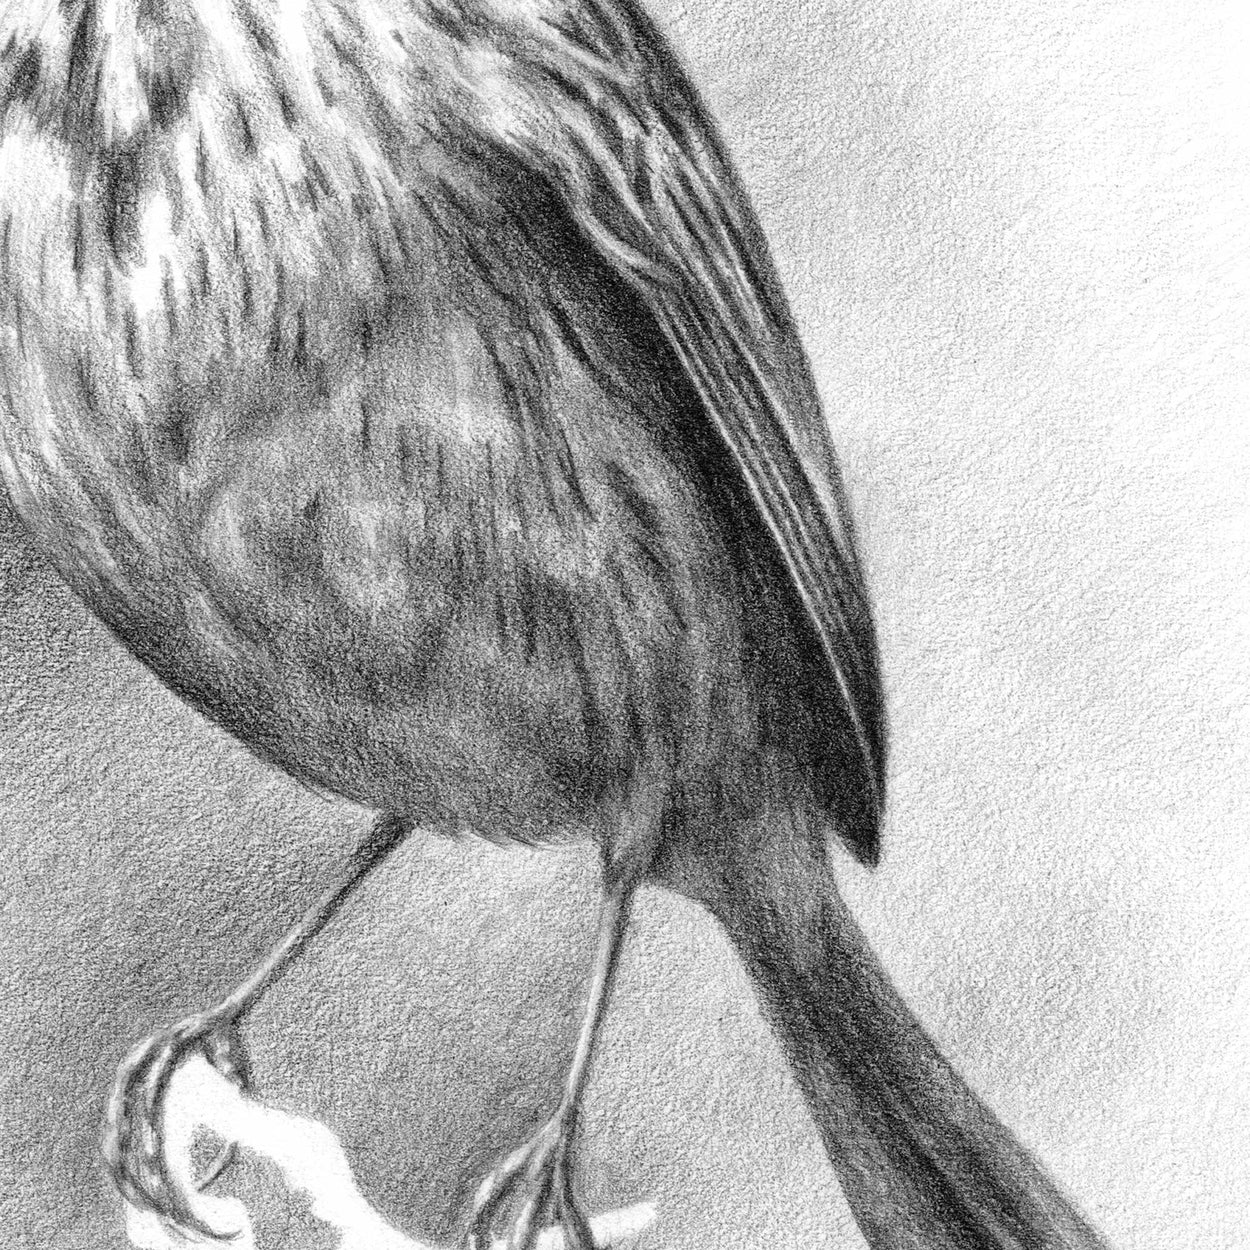 Close-up details of a pencil drawing of the legs and body of a small bird